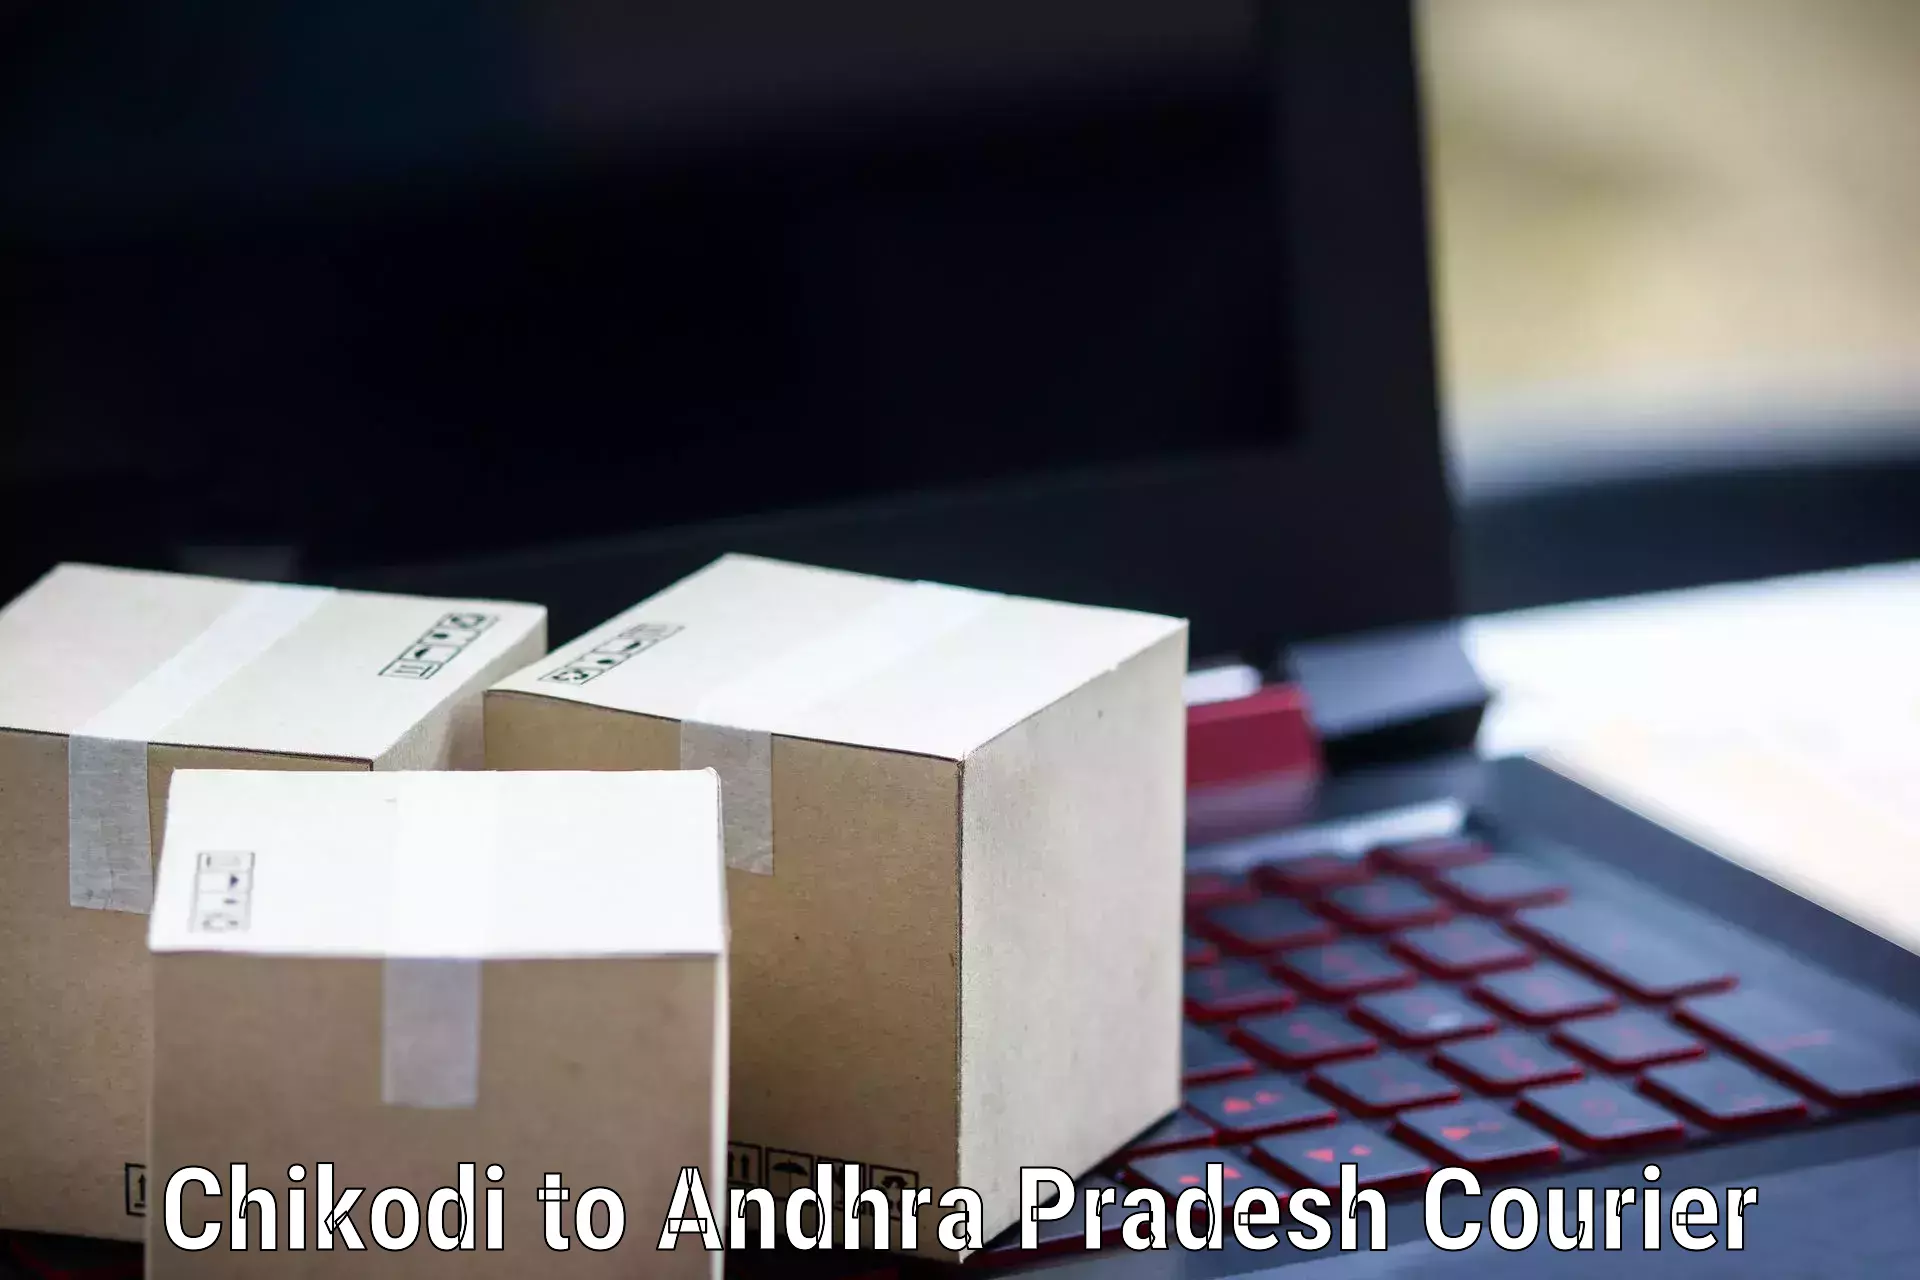 Package delivery network Chikodi to Ranastalam